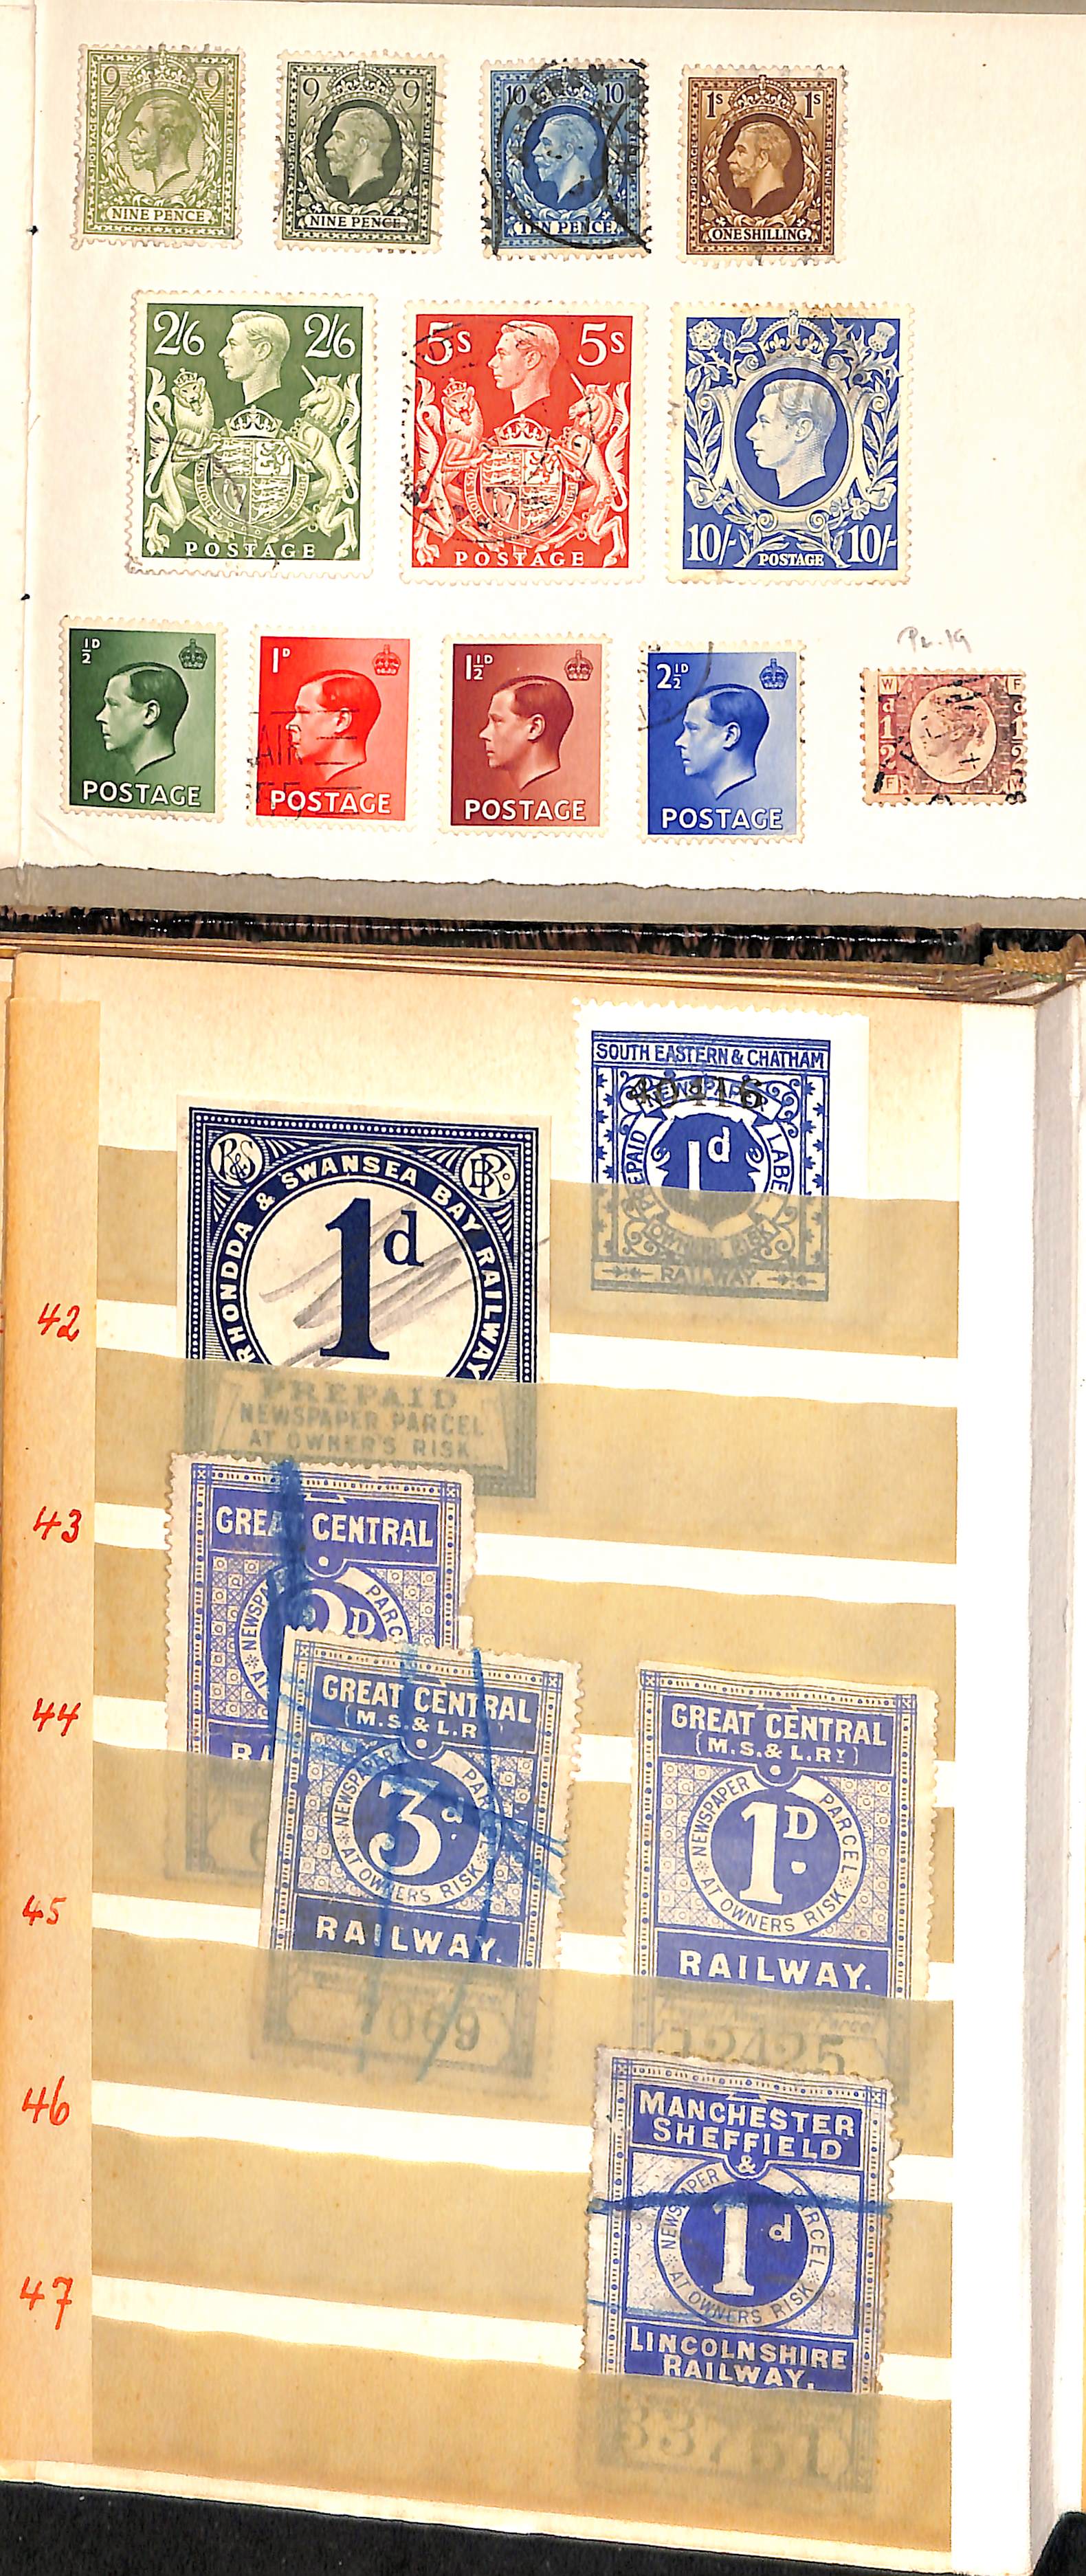 QV-QEII Stamps including 1840 2d and 1891 £1 (both with faults), 1958 3d tete-beche strip, 1969 £1 - Image 12 of 22